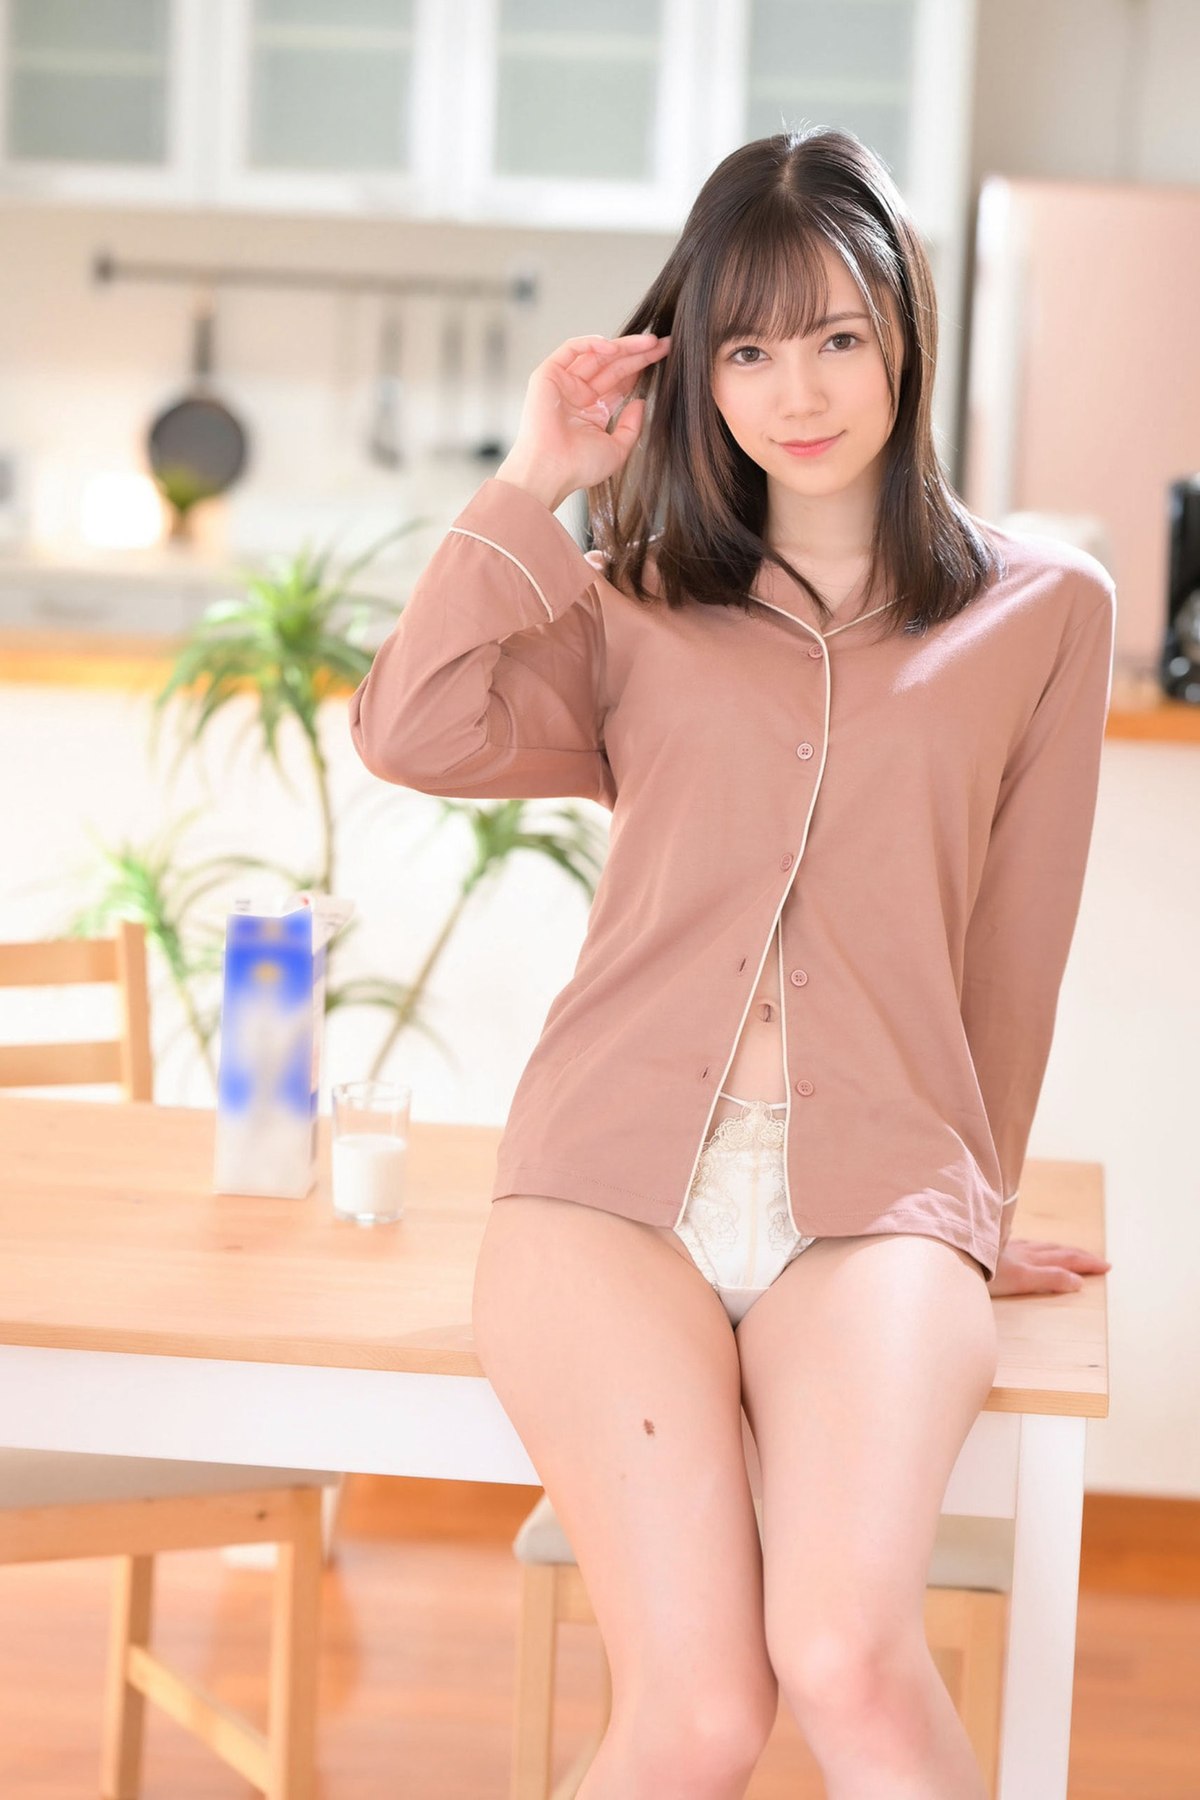 Photobook Remu Suzumori 涼森れむ Ejaculates And Lives Together A 0003 9351490987.jpg